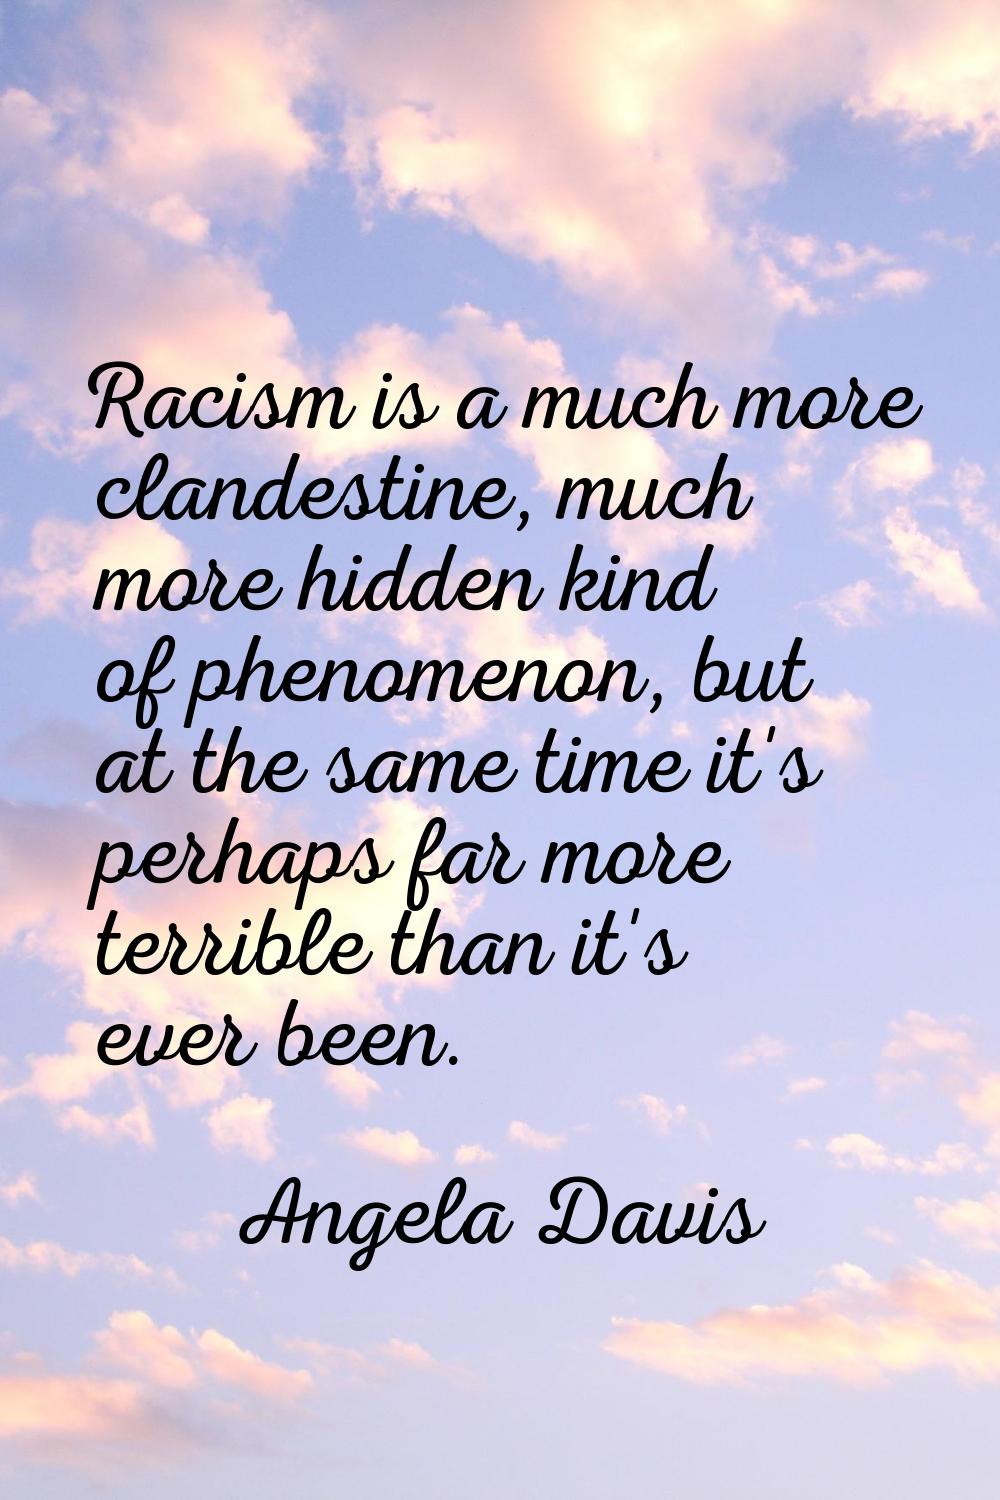 Racism is a much more clandestine, much more hidden kind of phenomenon, but at the same time it's p